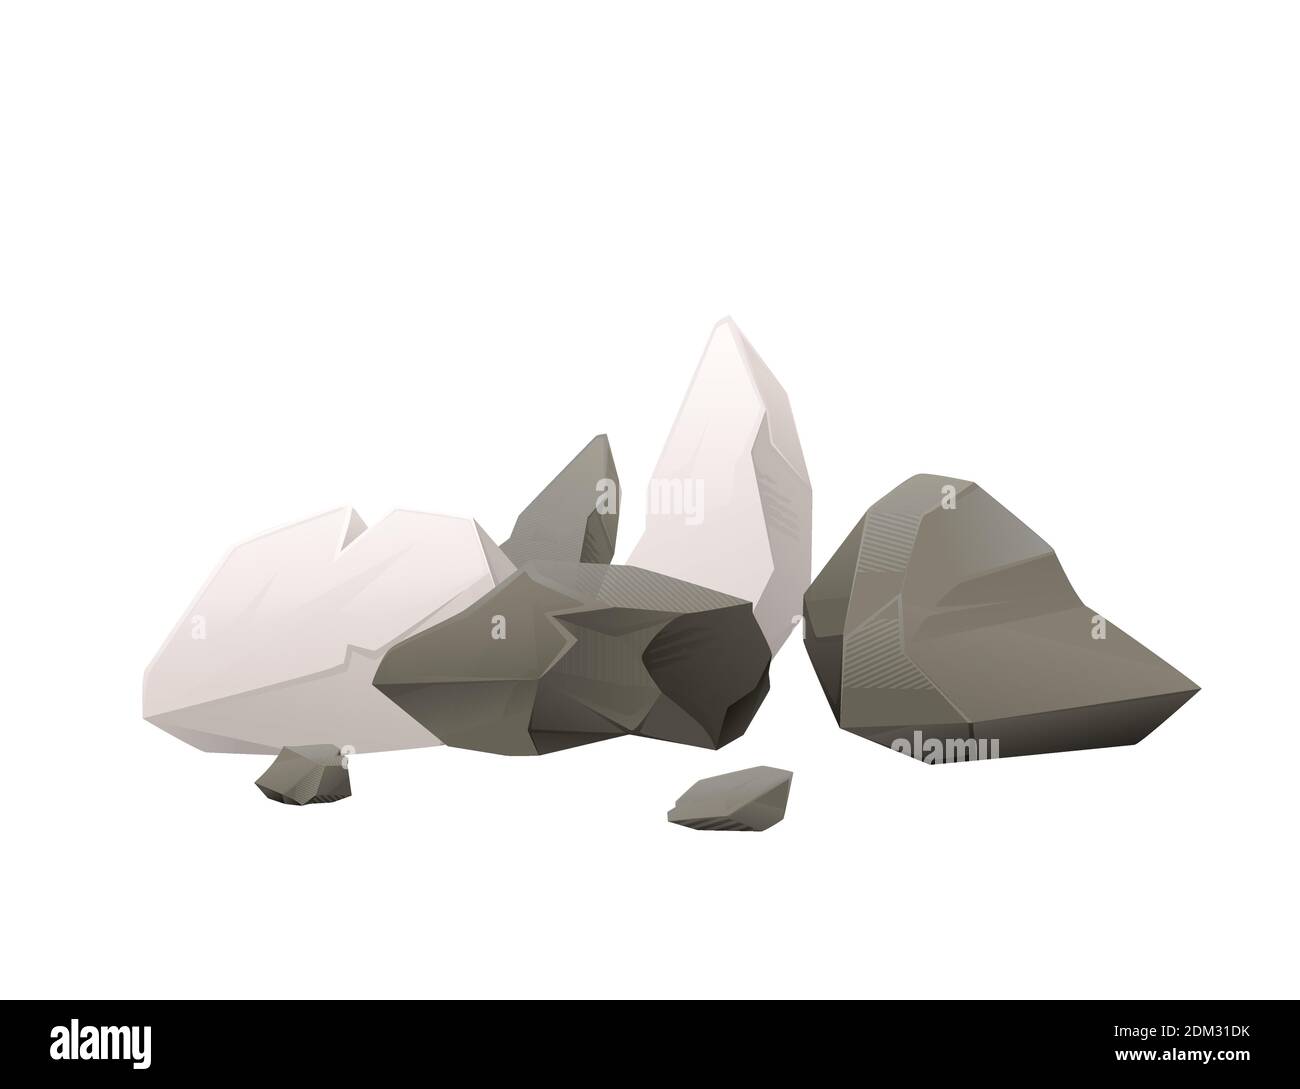 Group of gray stones and rocks different sizes and shapes flat vector illustration isolated on white background cartoon style design item for games Stock Vector